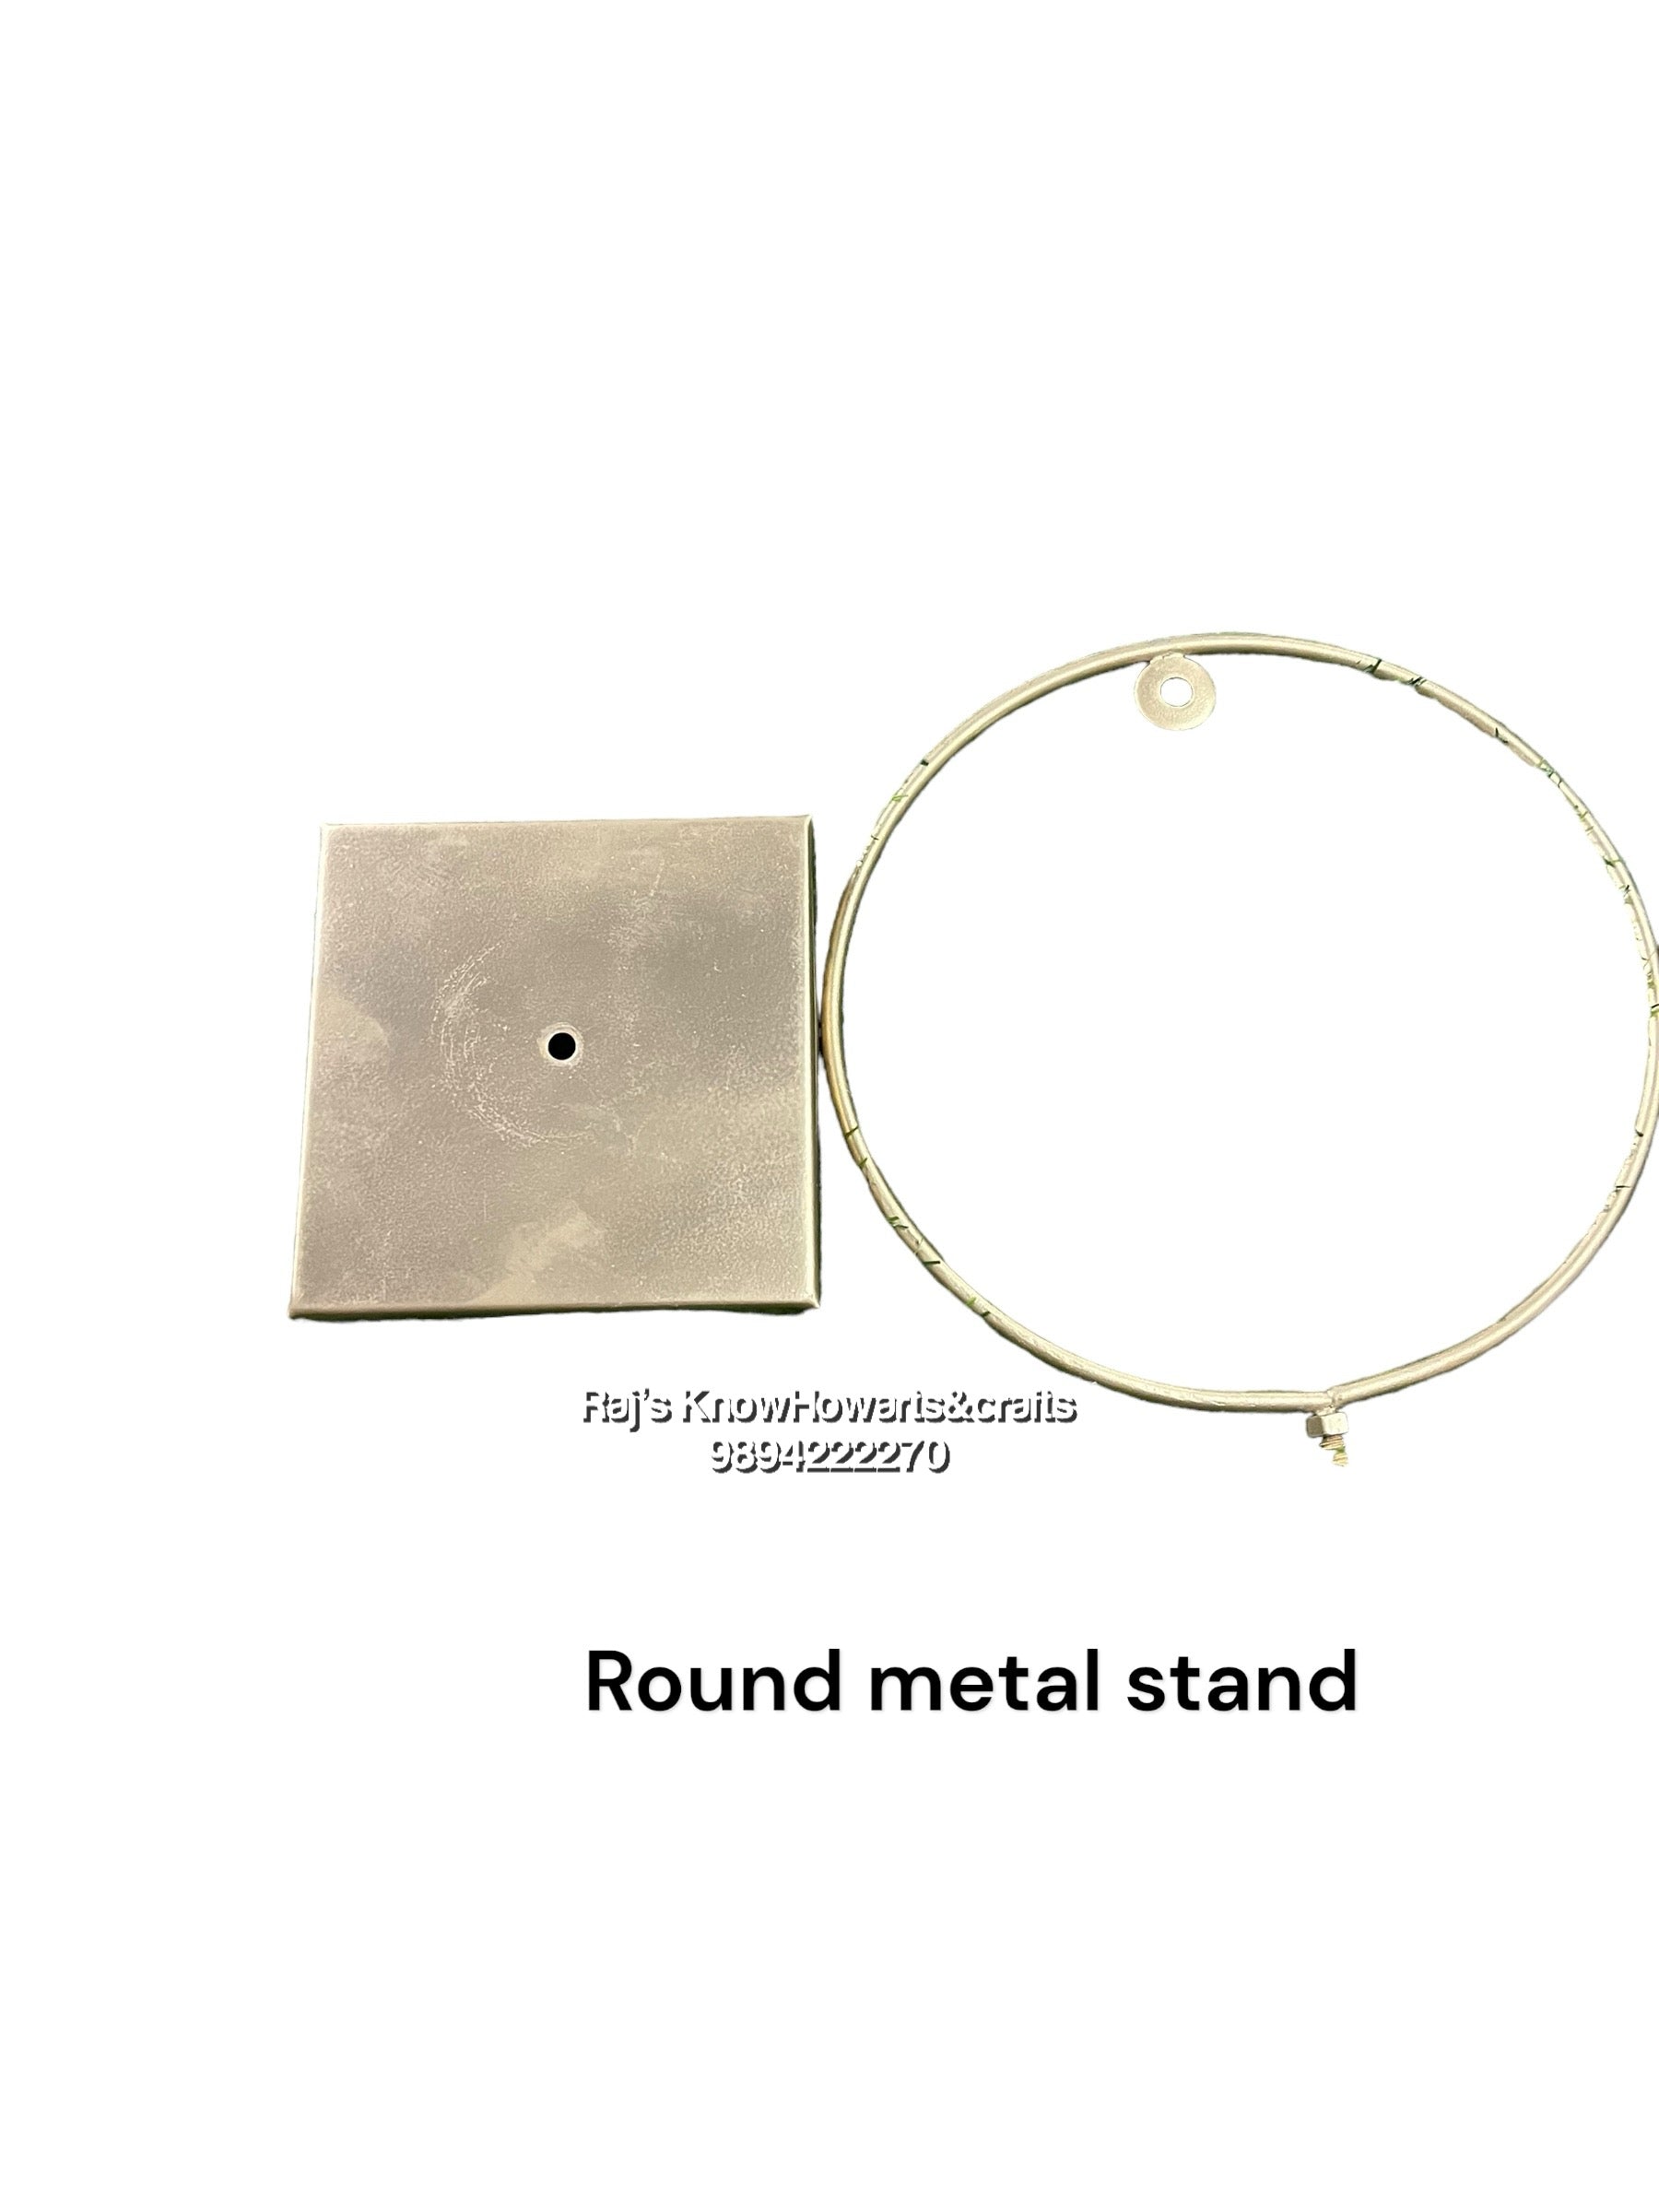 Round metal stand